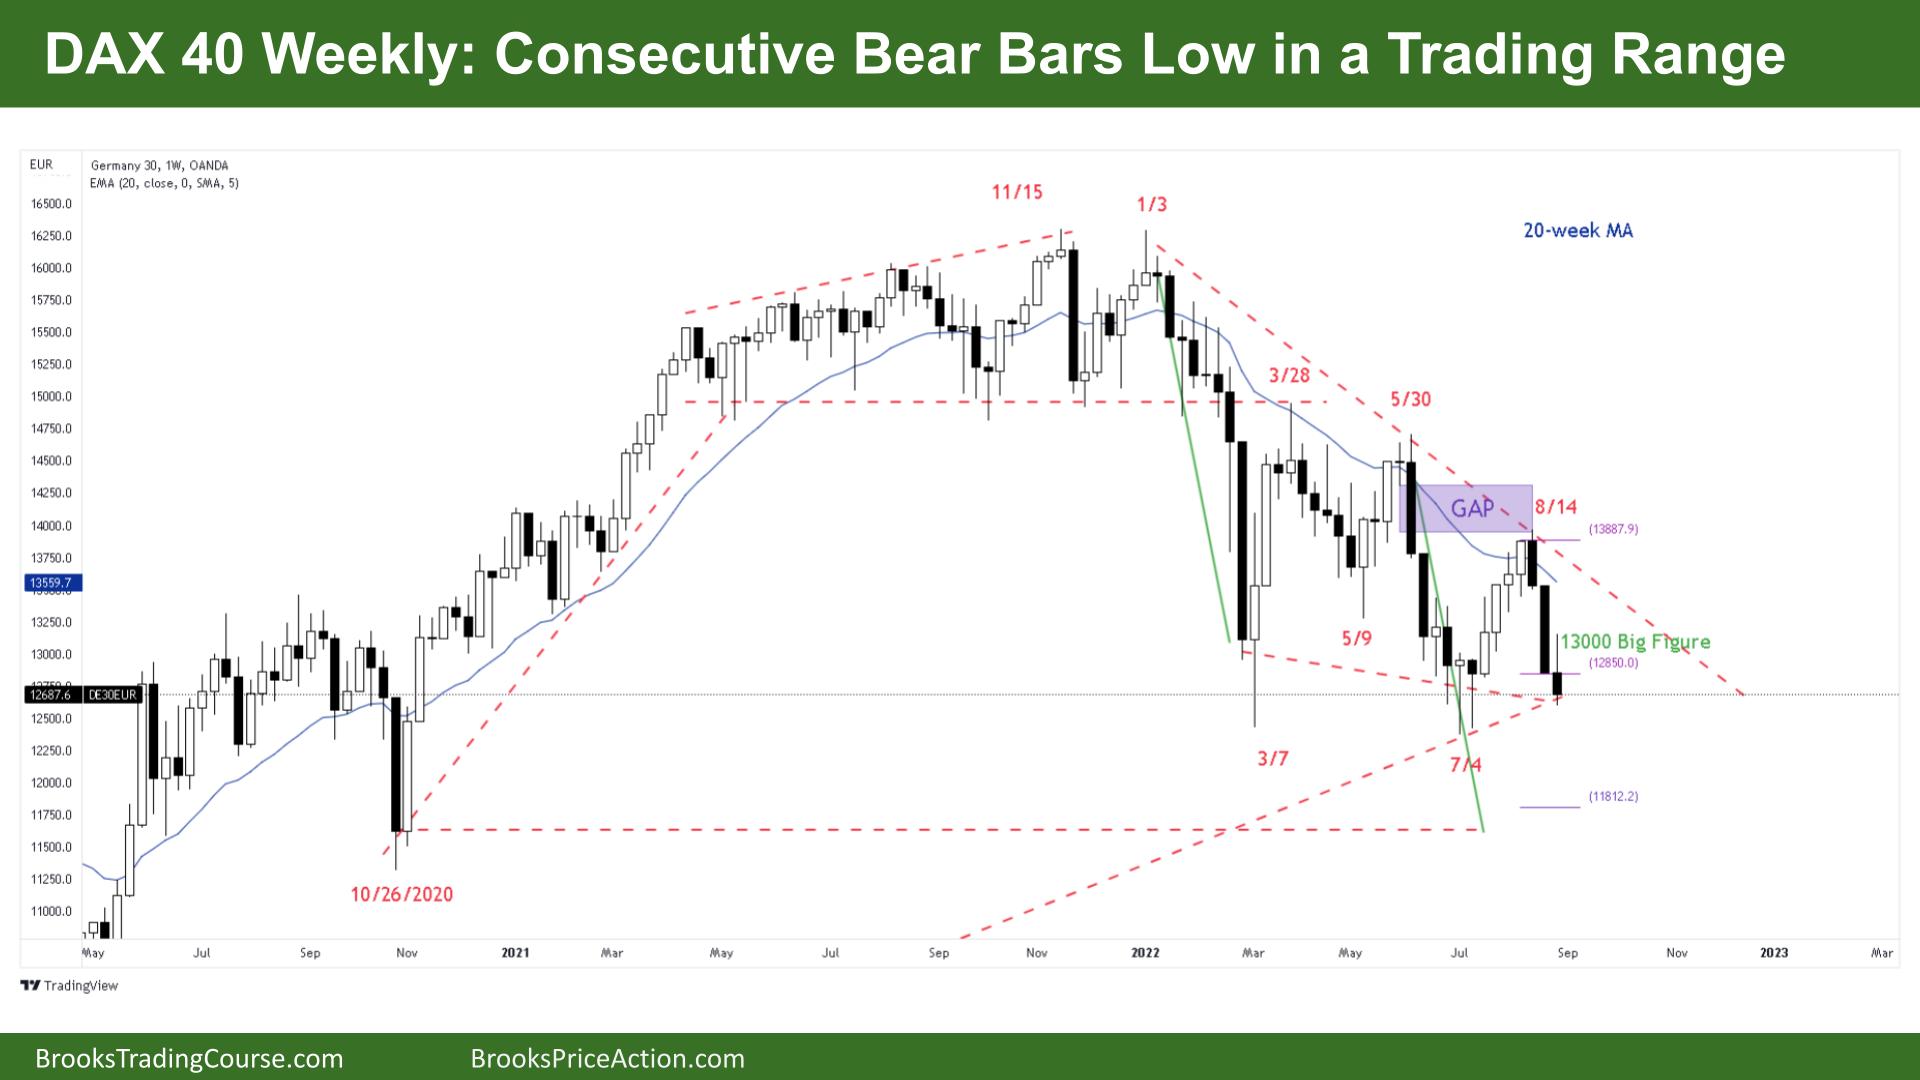 DAX 40 Consecutive Bear Bars Low in a Trading Range